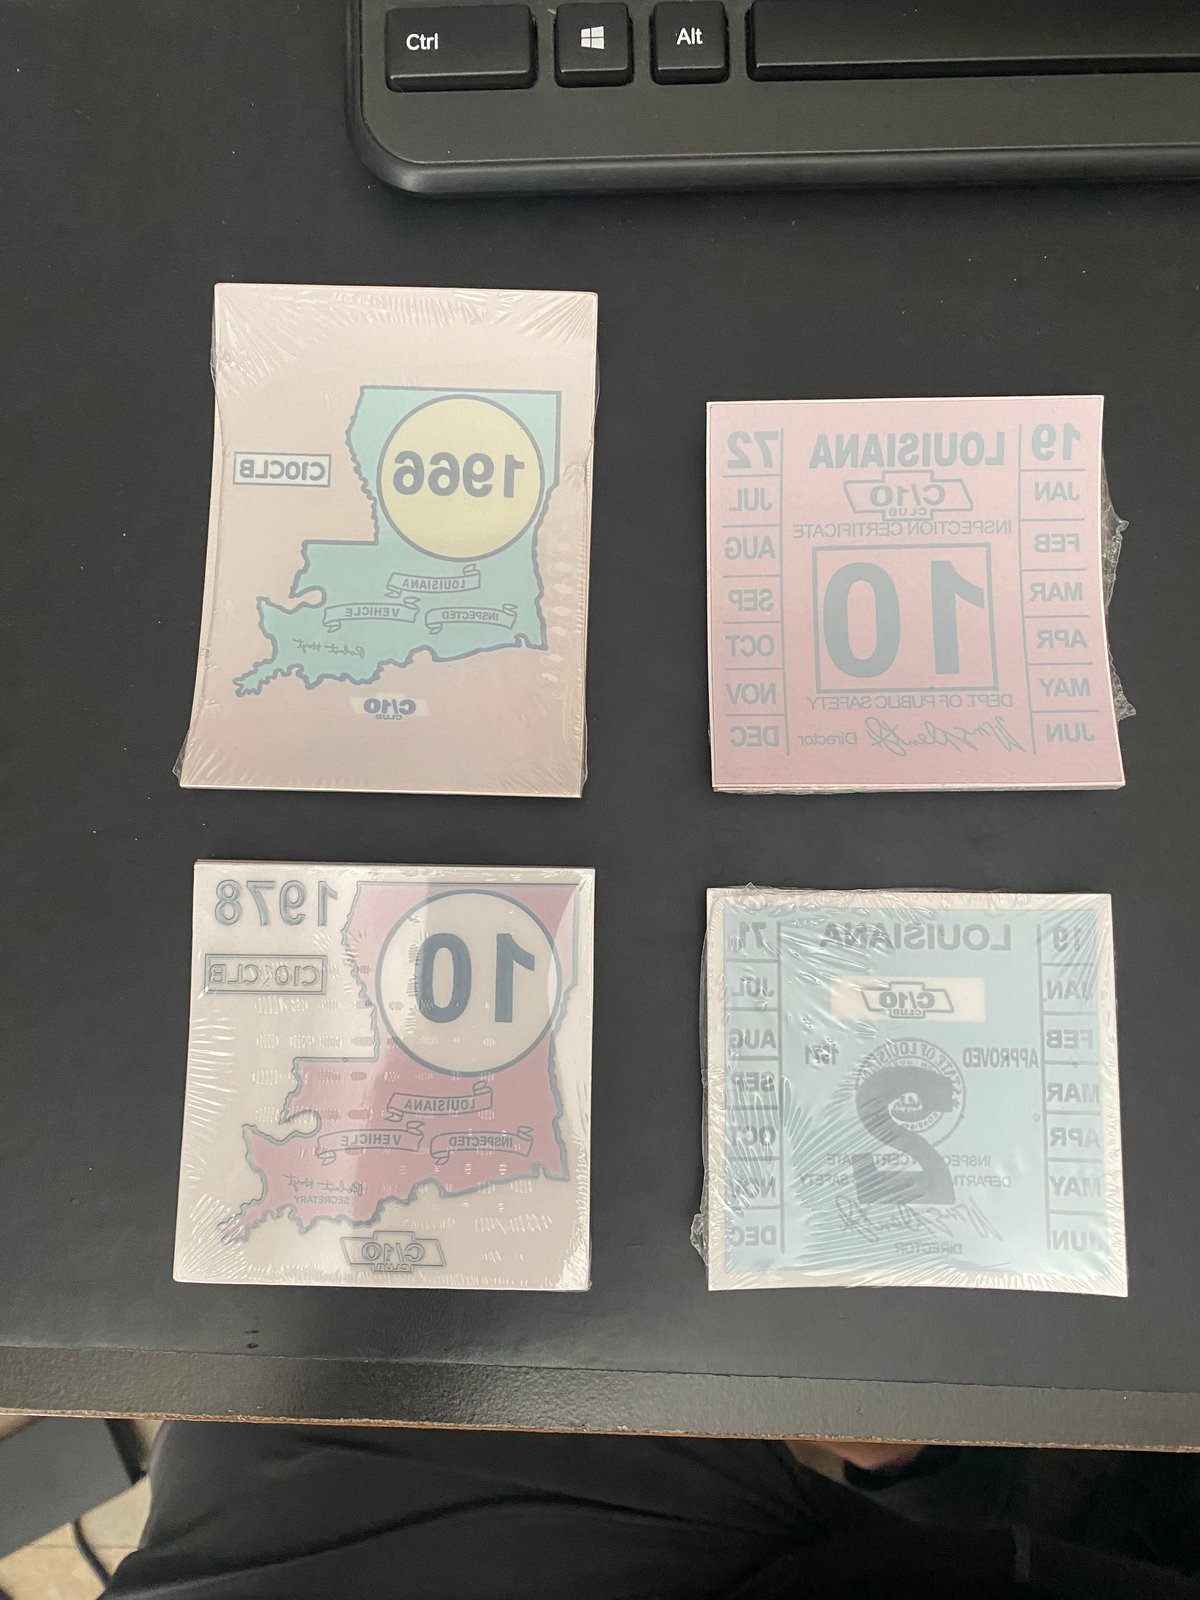 Old style state inspection stickers / C/10 Club Louisiana